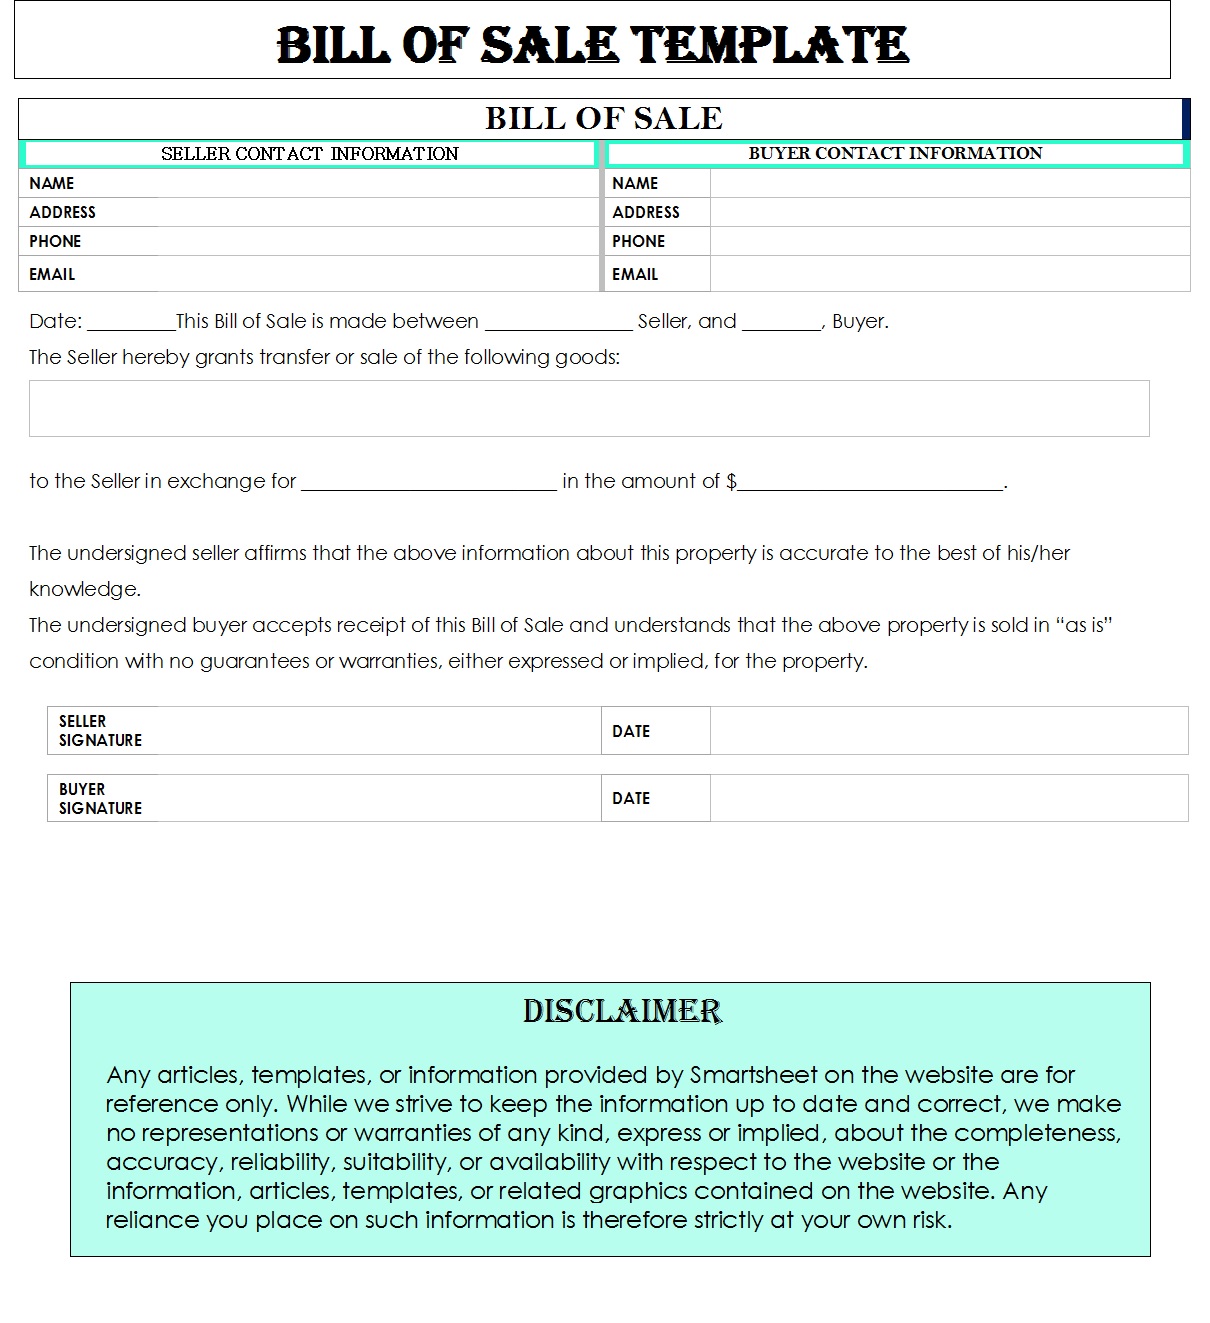 free bill of sale forms 24 word pdf eforms basic bill of sale